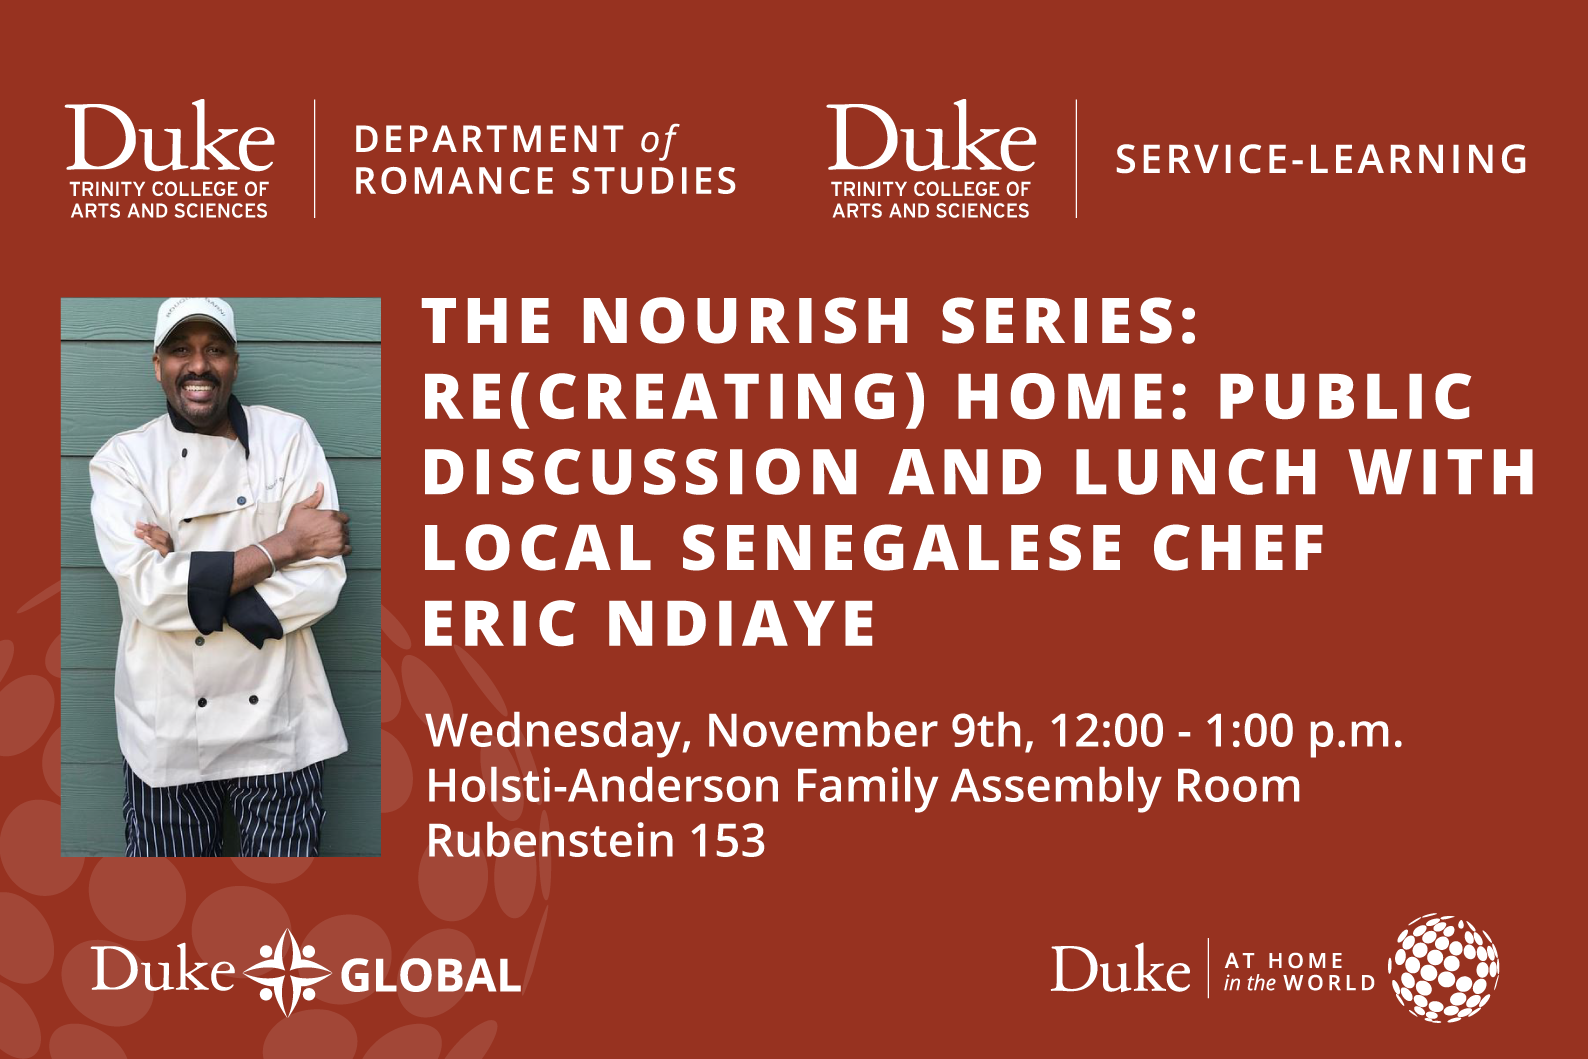 The Nourish series  Recreating Home Public Discussion and Lunch with Local Senegalese Chef Eric Ndiaye